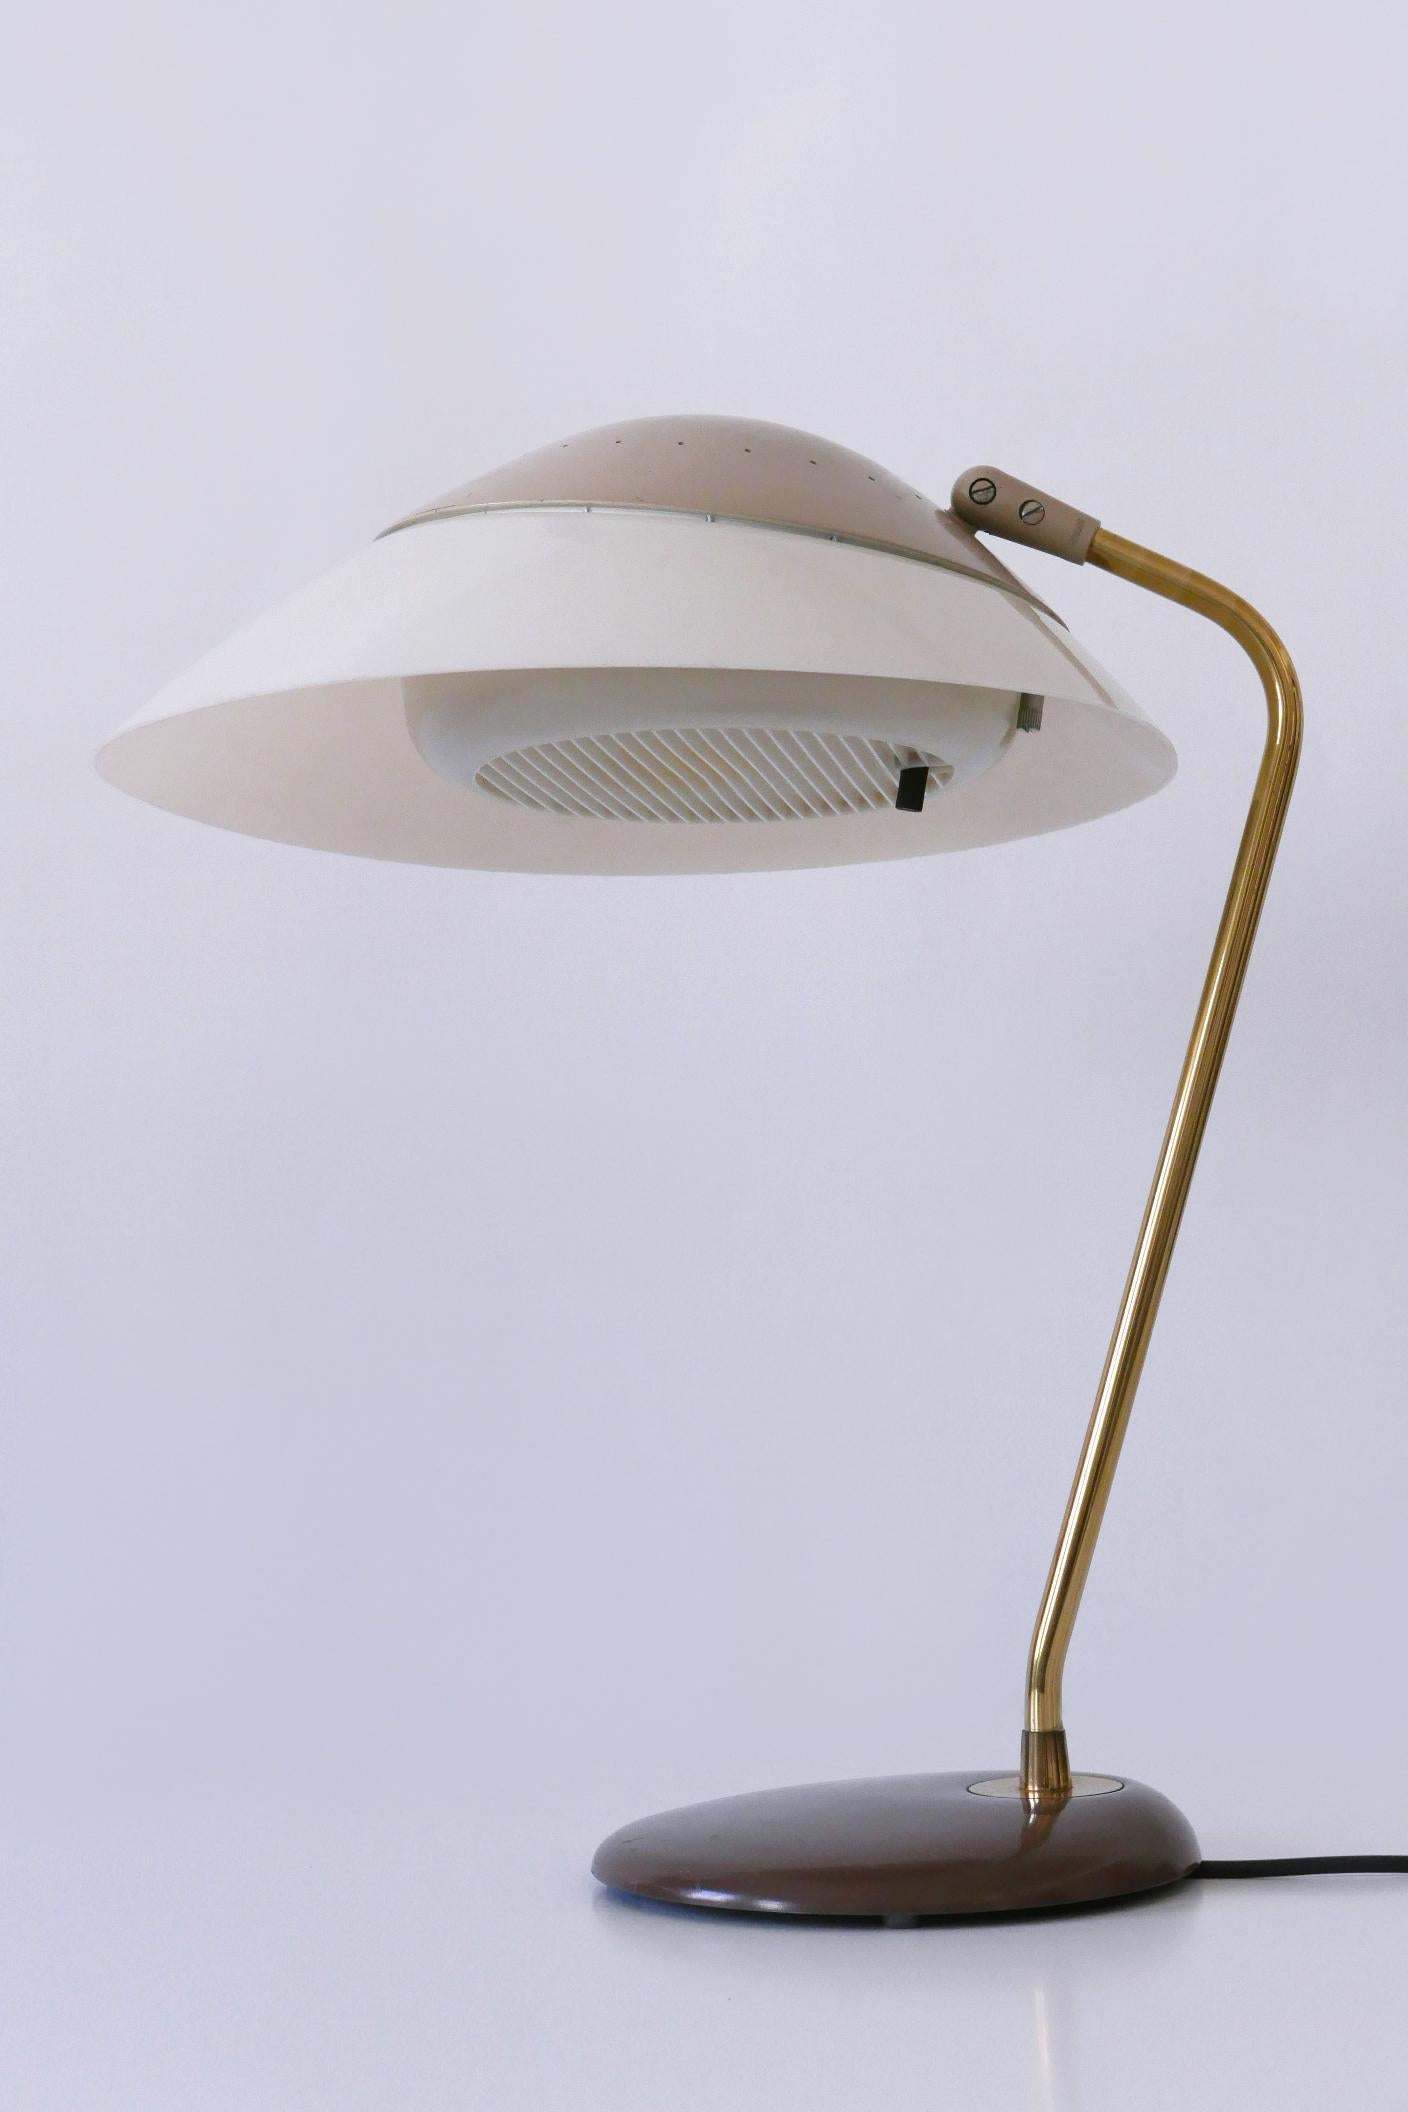 Elegant Table Lamp or Desk Light by Gerald Thurston for Lightolier USA 1950s In Good Condition For Sale In Munich, DE